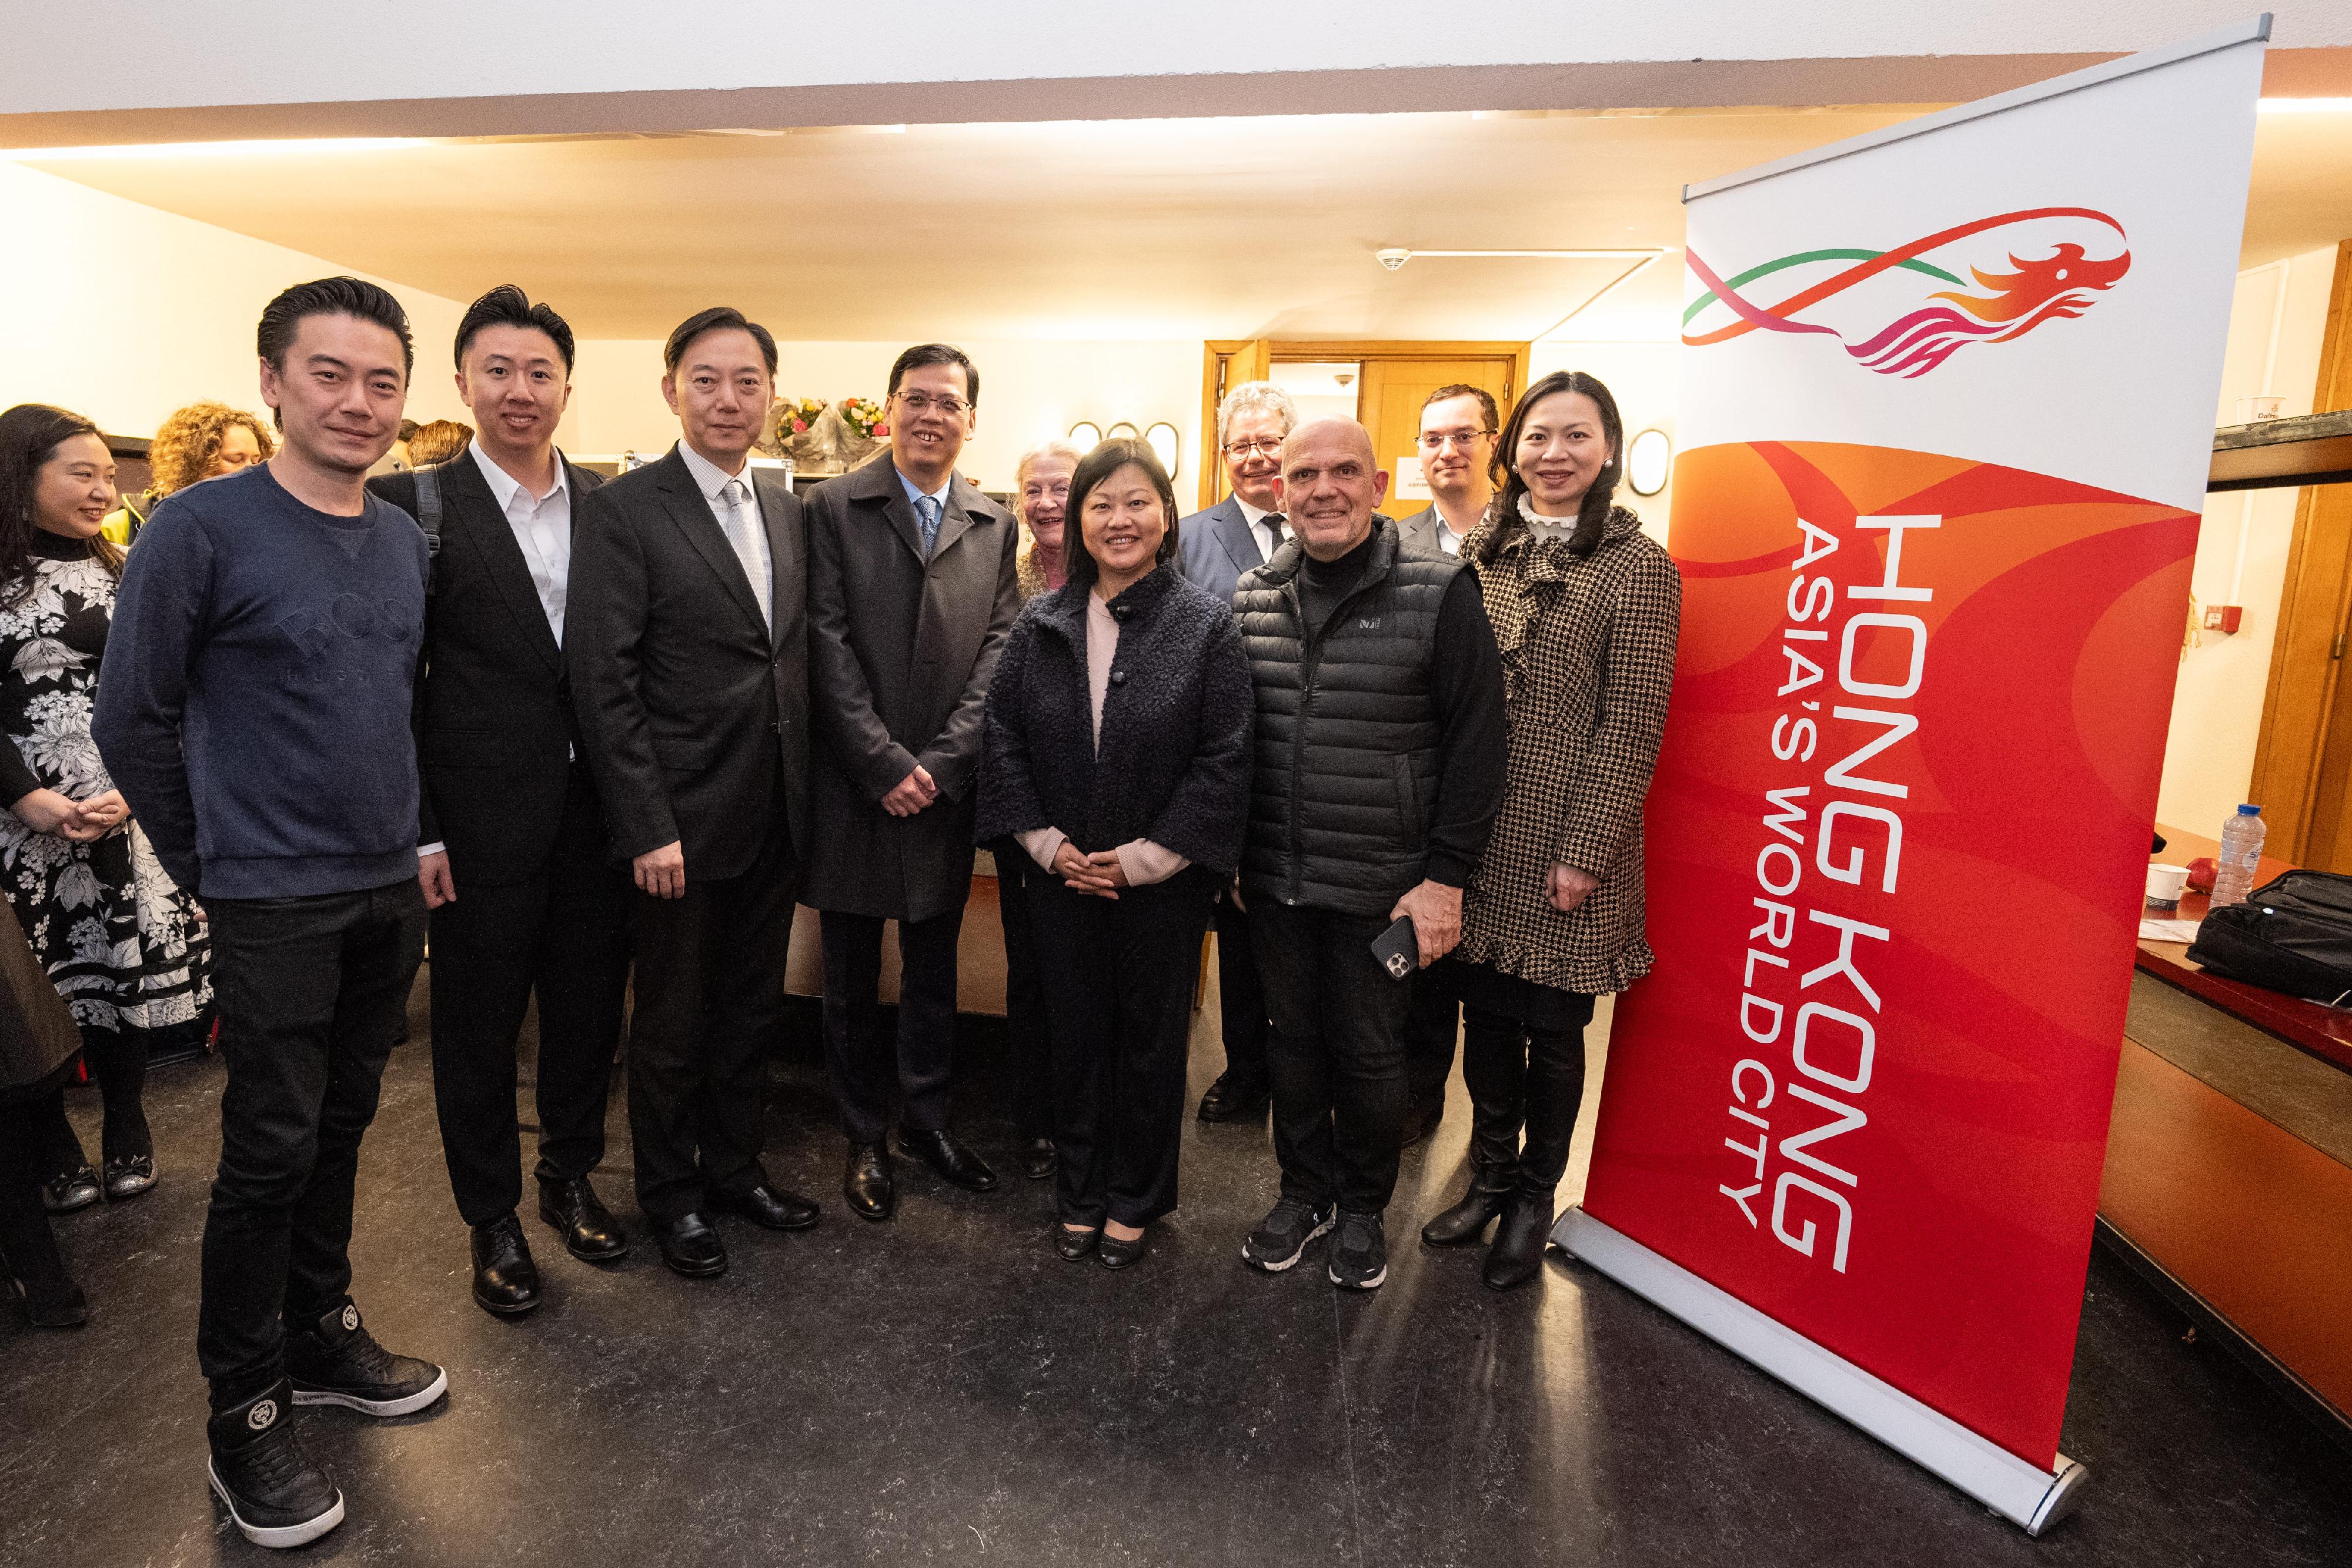 Special Representative for Hong Kong Economic and Trade Affairs to the European Union, Ms Shirley Yung (front row, third right), met with members of the Hong Kong Philharmonic Orchestra (HK Phil) and the guests during the concert held in Brussels on March 8, including the Music Director of the HK Phil, Jaap van Zweden (front row, second right) and the Chief Executive, Mr Benedikt Fohr (back row, second right), as well as the Chinese Mission to the European Union, Minister Zhu Jing (front row, fourth left), and Chargé d'affaires of the Chinese Embassy in Belgium, Minister Counsellor Mr Wu Gang (front row, third left).